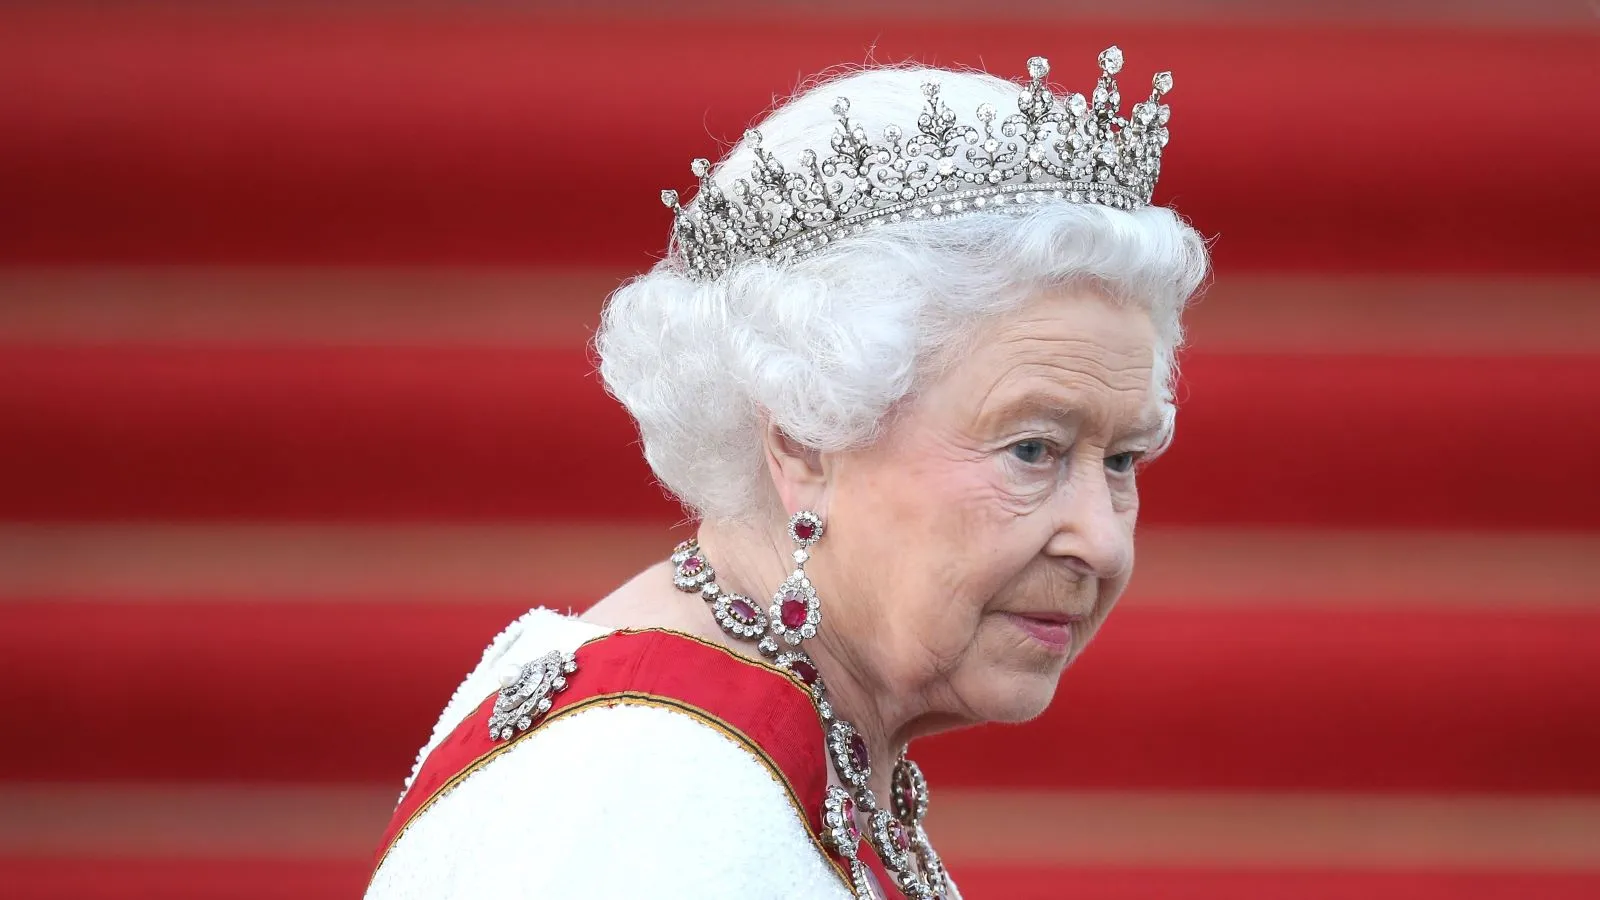 ‘The Crown’ pauses filming out of respect for the Queen’s passing